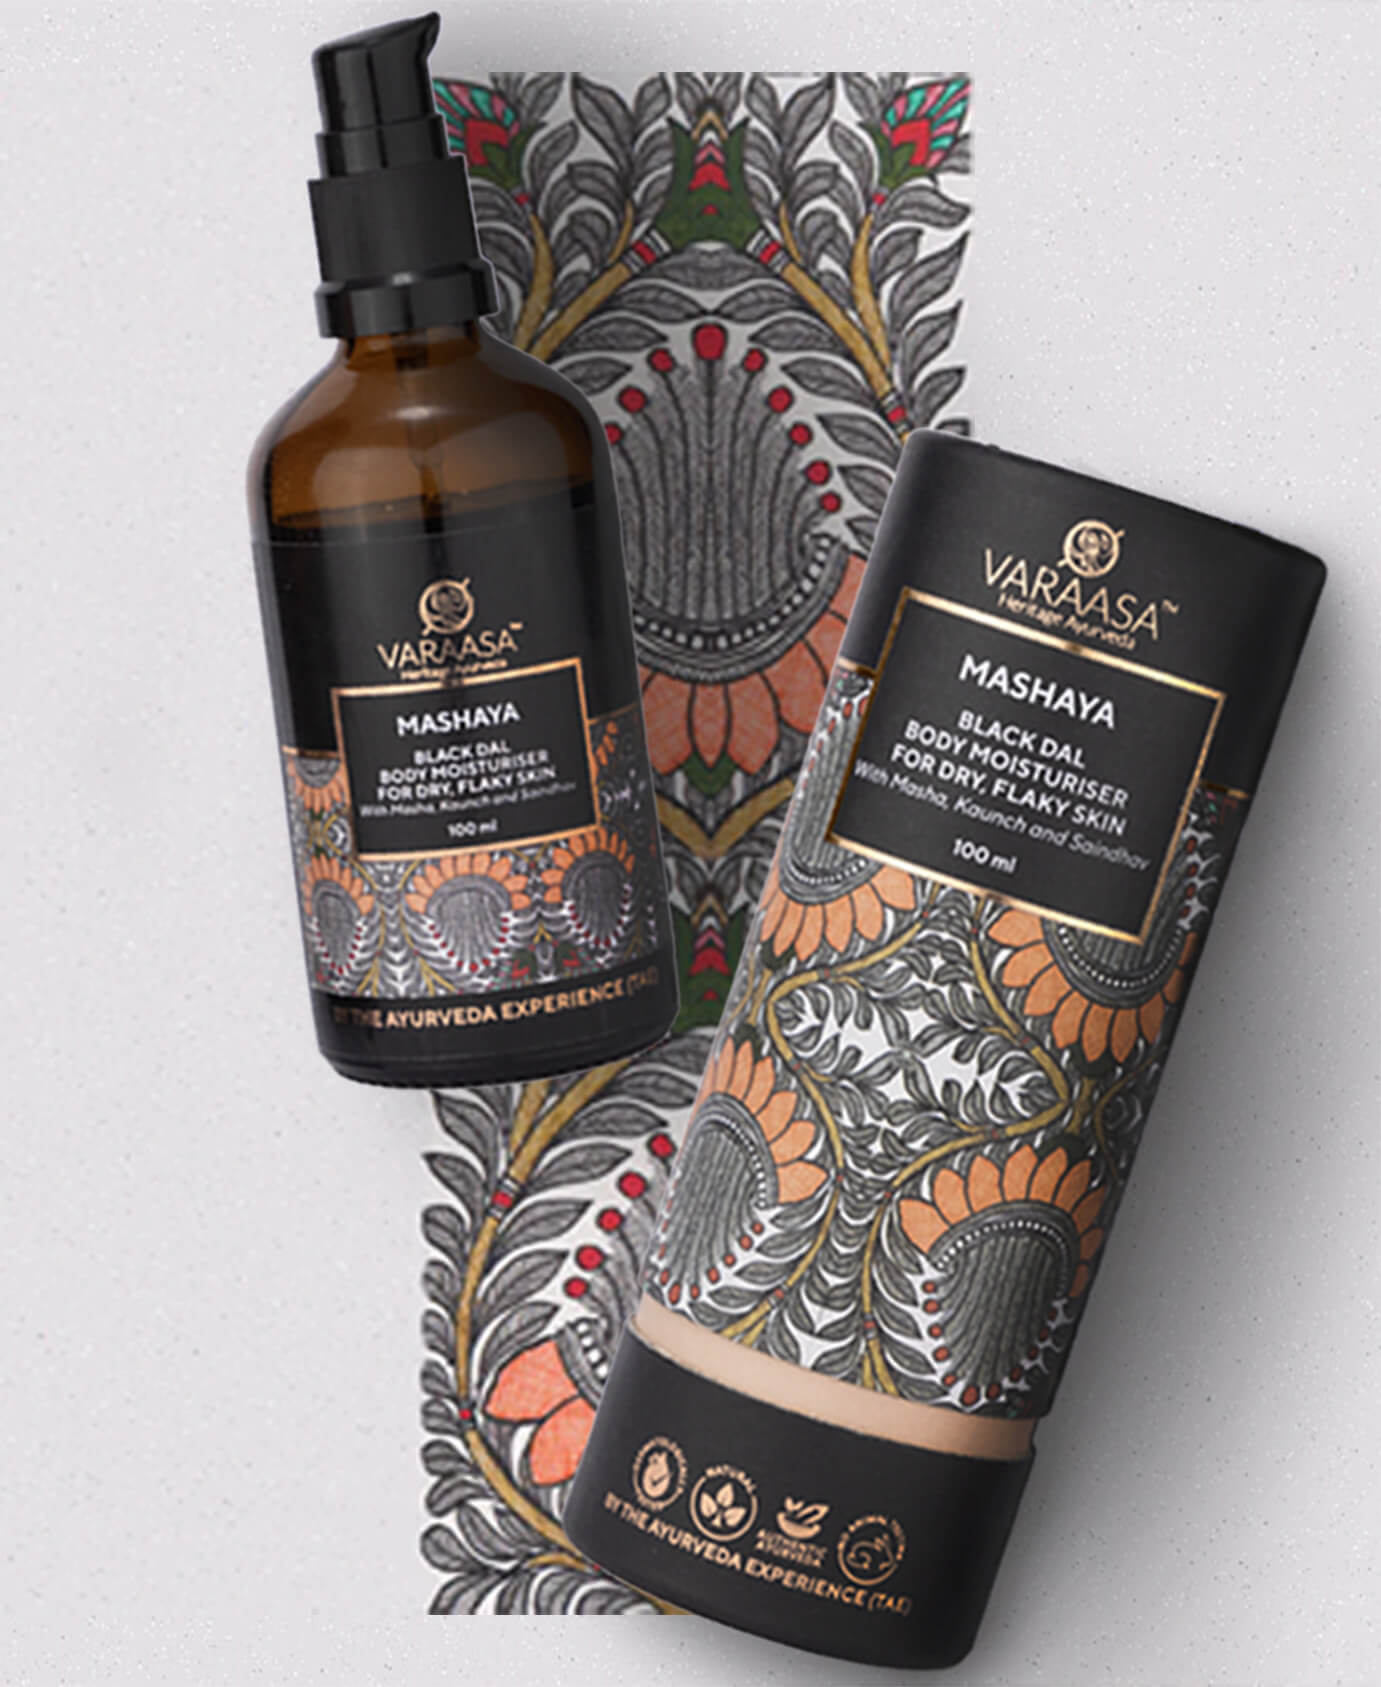 Image showcasing the exquisite packaging of Mashaya Black Dal Body Moisturiser. The packaging design features intricate artwork and vibrant colors, enhancing the visual appeal of the product.